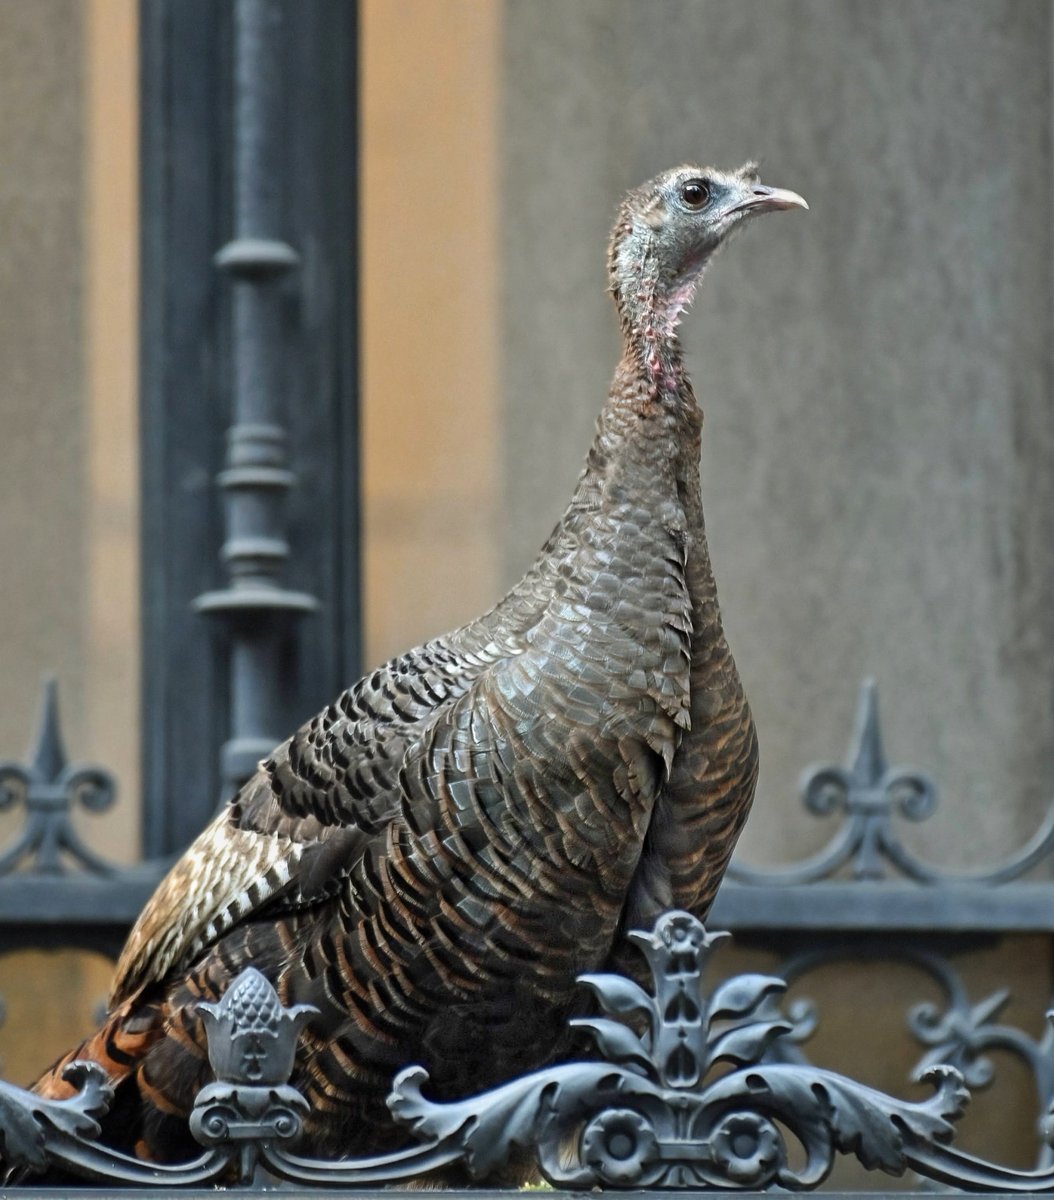 Midtown's Wild Turkey showed off her fine plumage while visiting the awning of Saks Fifth Avenue this afternoon. 🦃